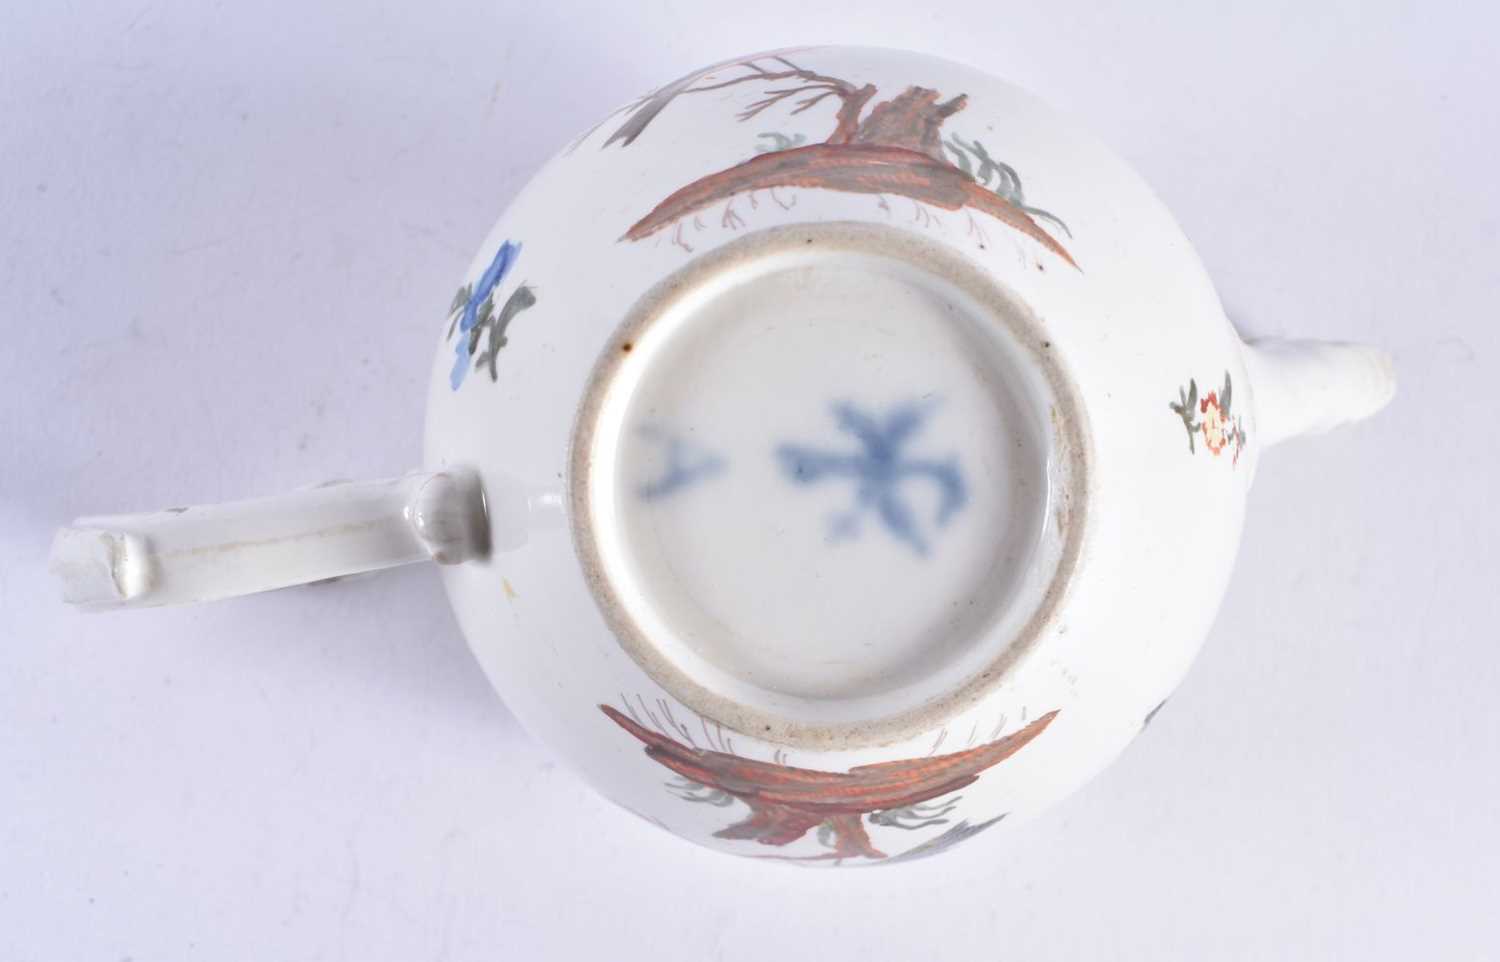 A RARE 18TH CENTURY GERMAN PORCELAIN BULLET FORM TEAPOT AND COVER painted in the Meissen style - Image 6 of 6